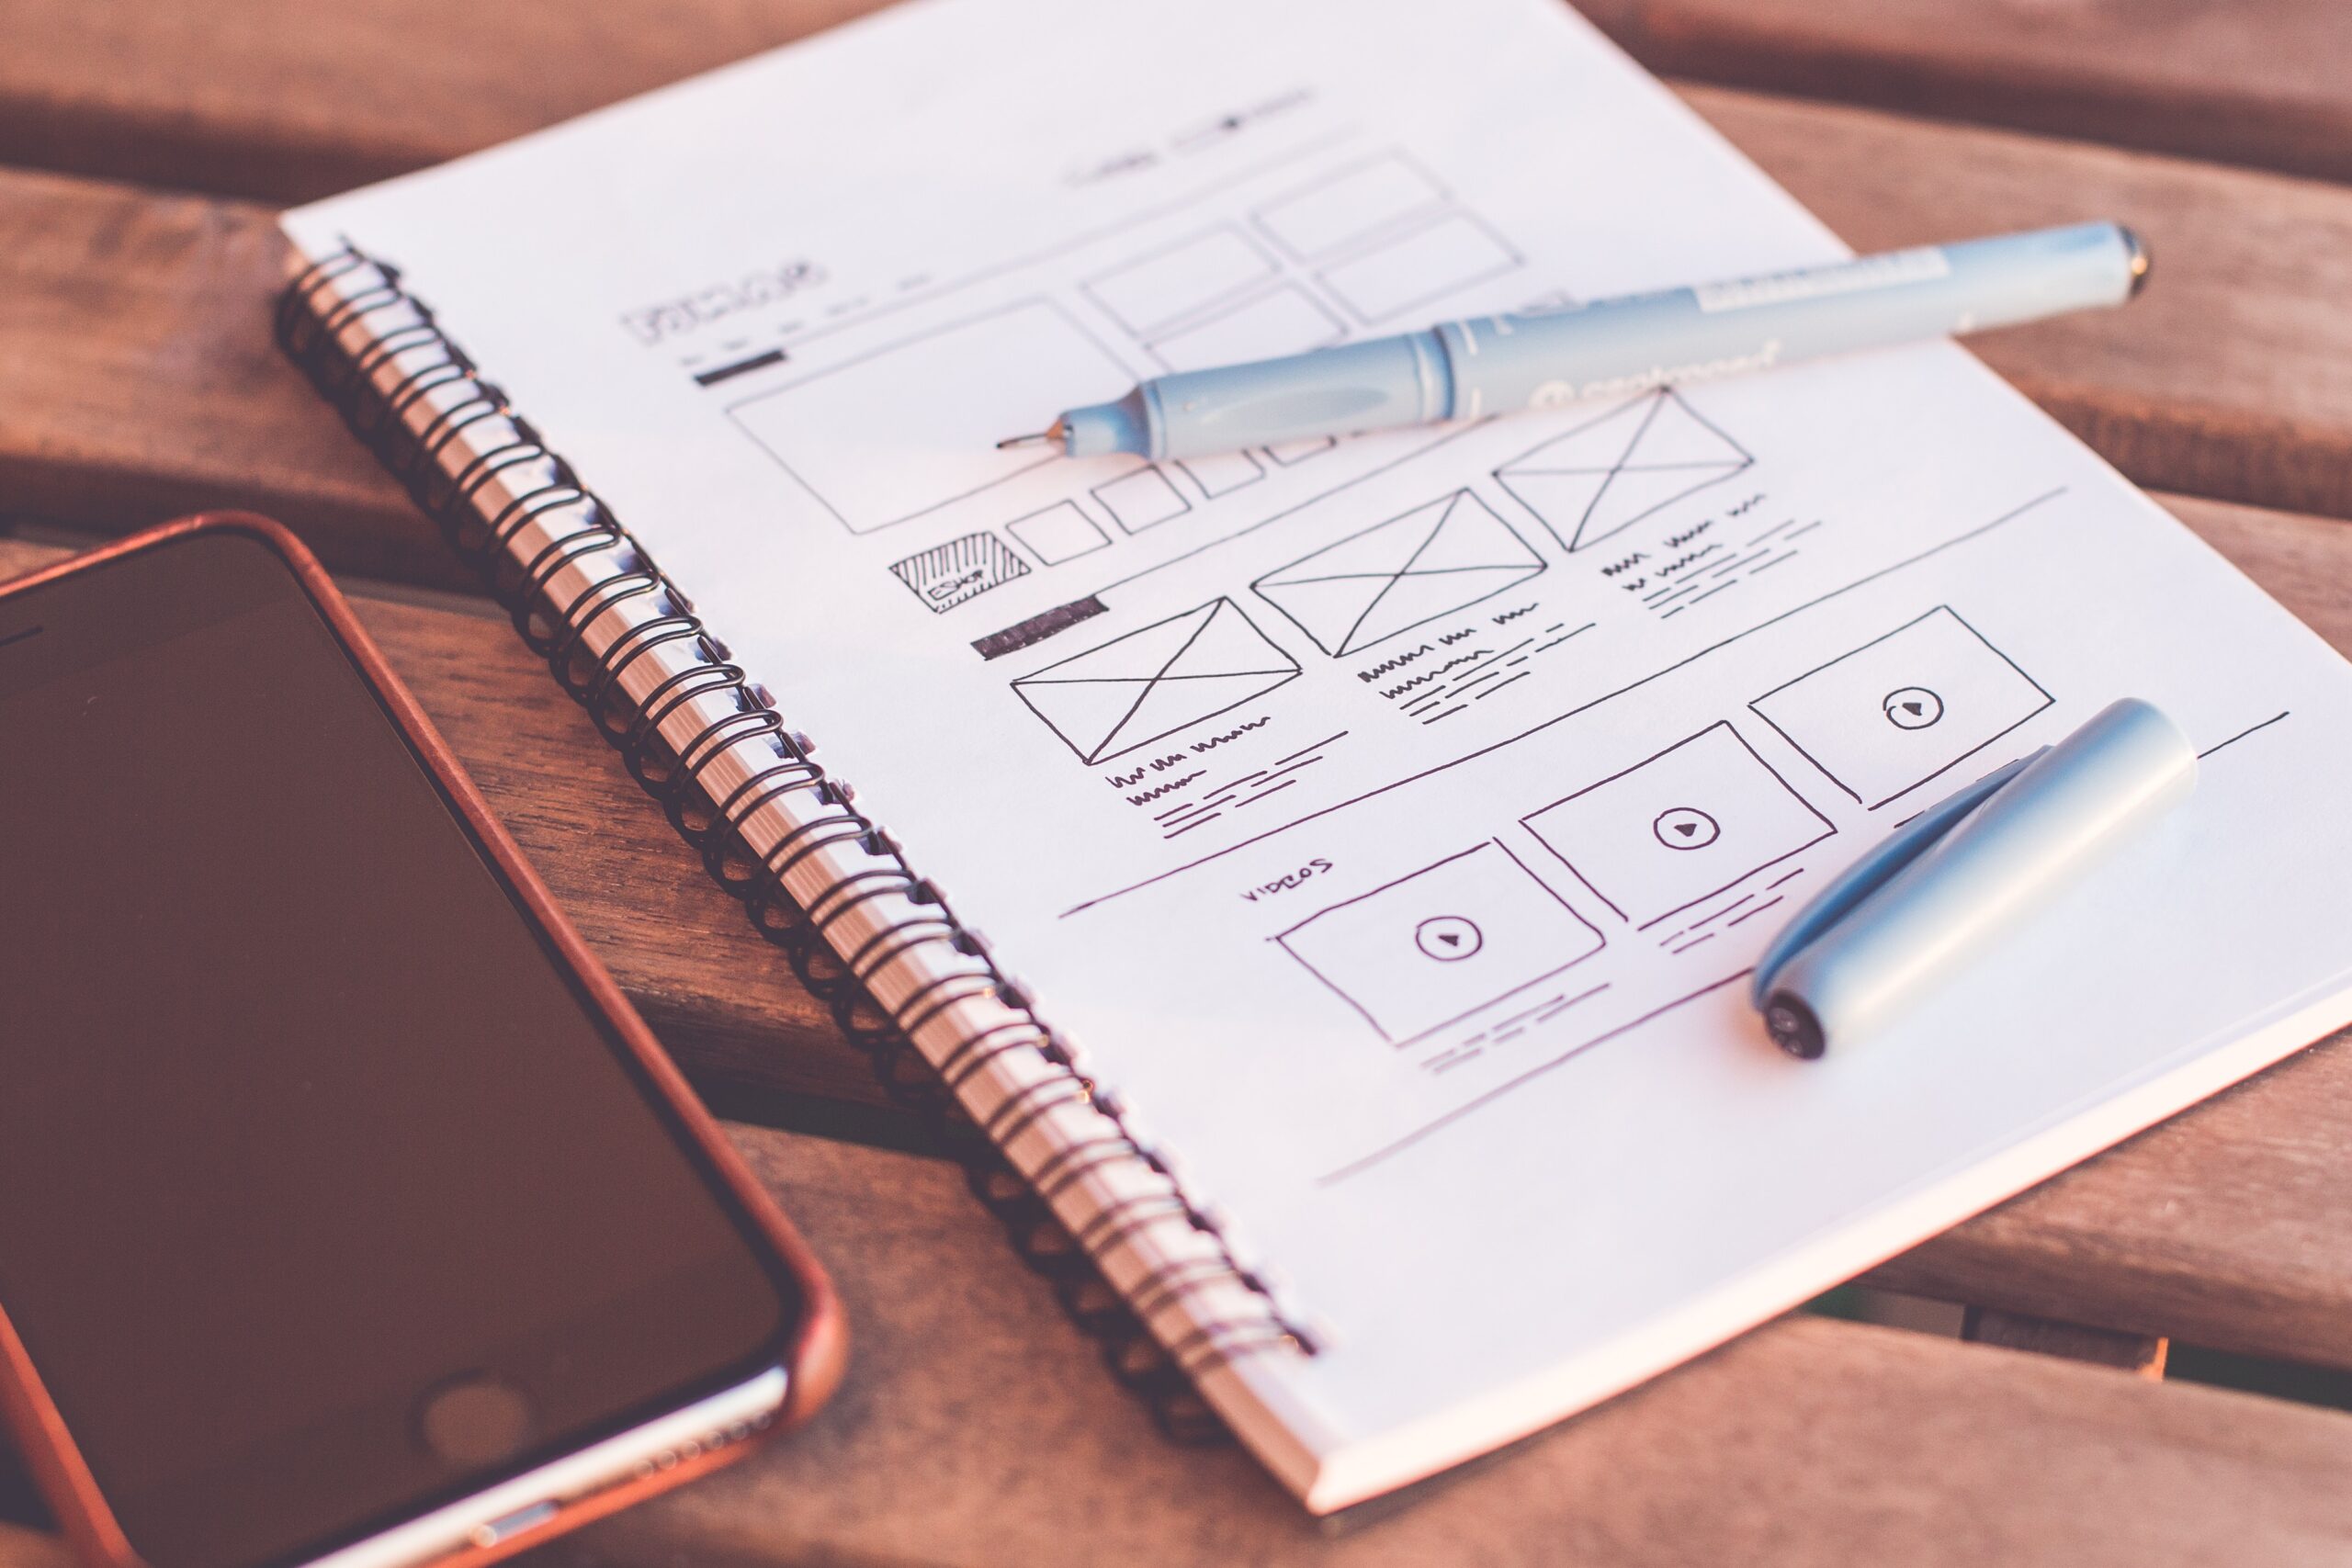 What is User Experience (UX) Design, and why is it important?